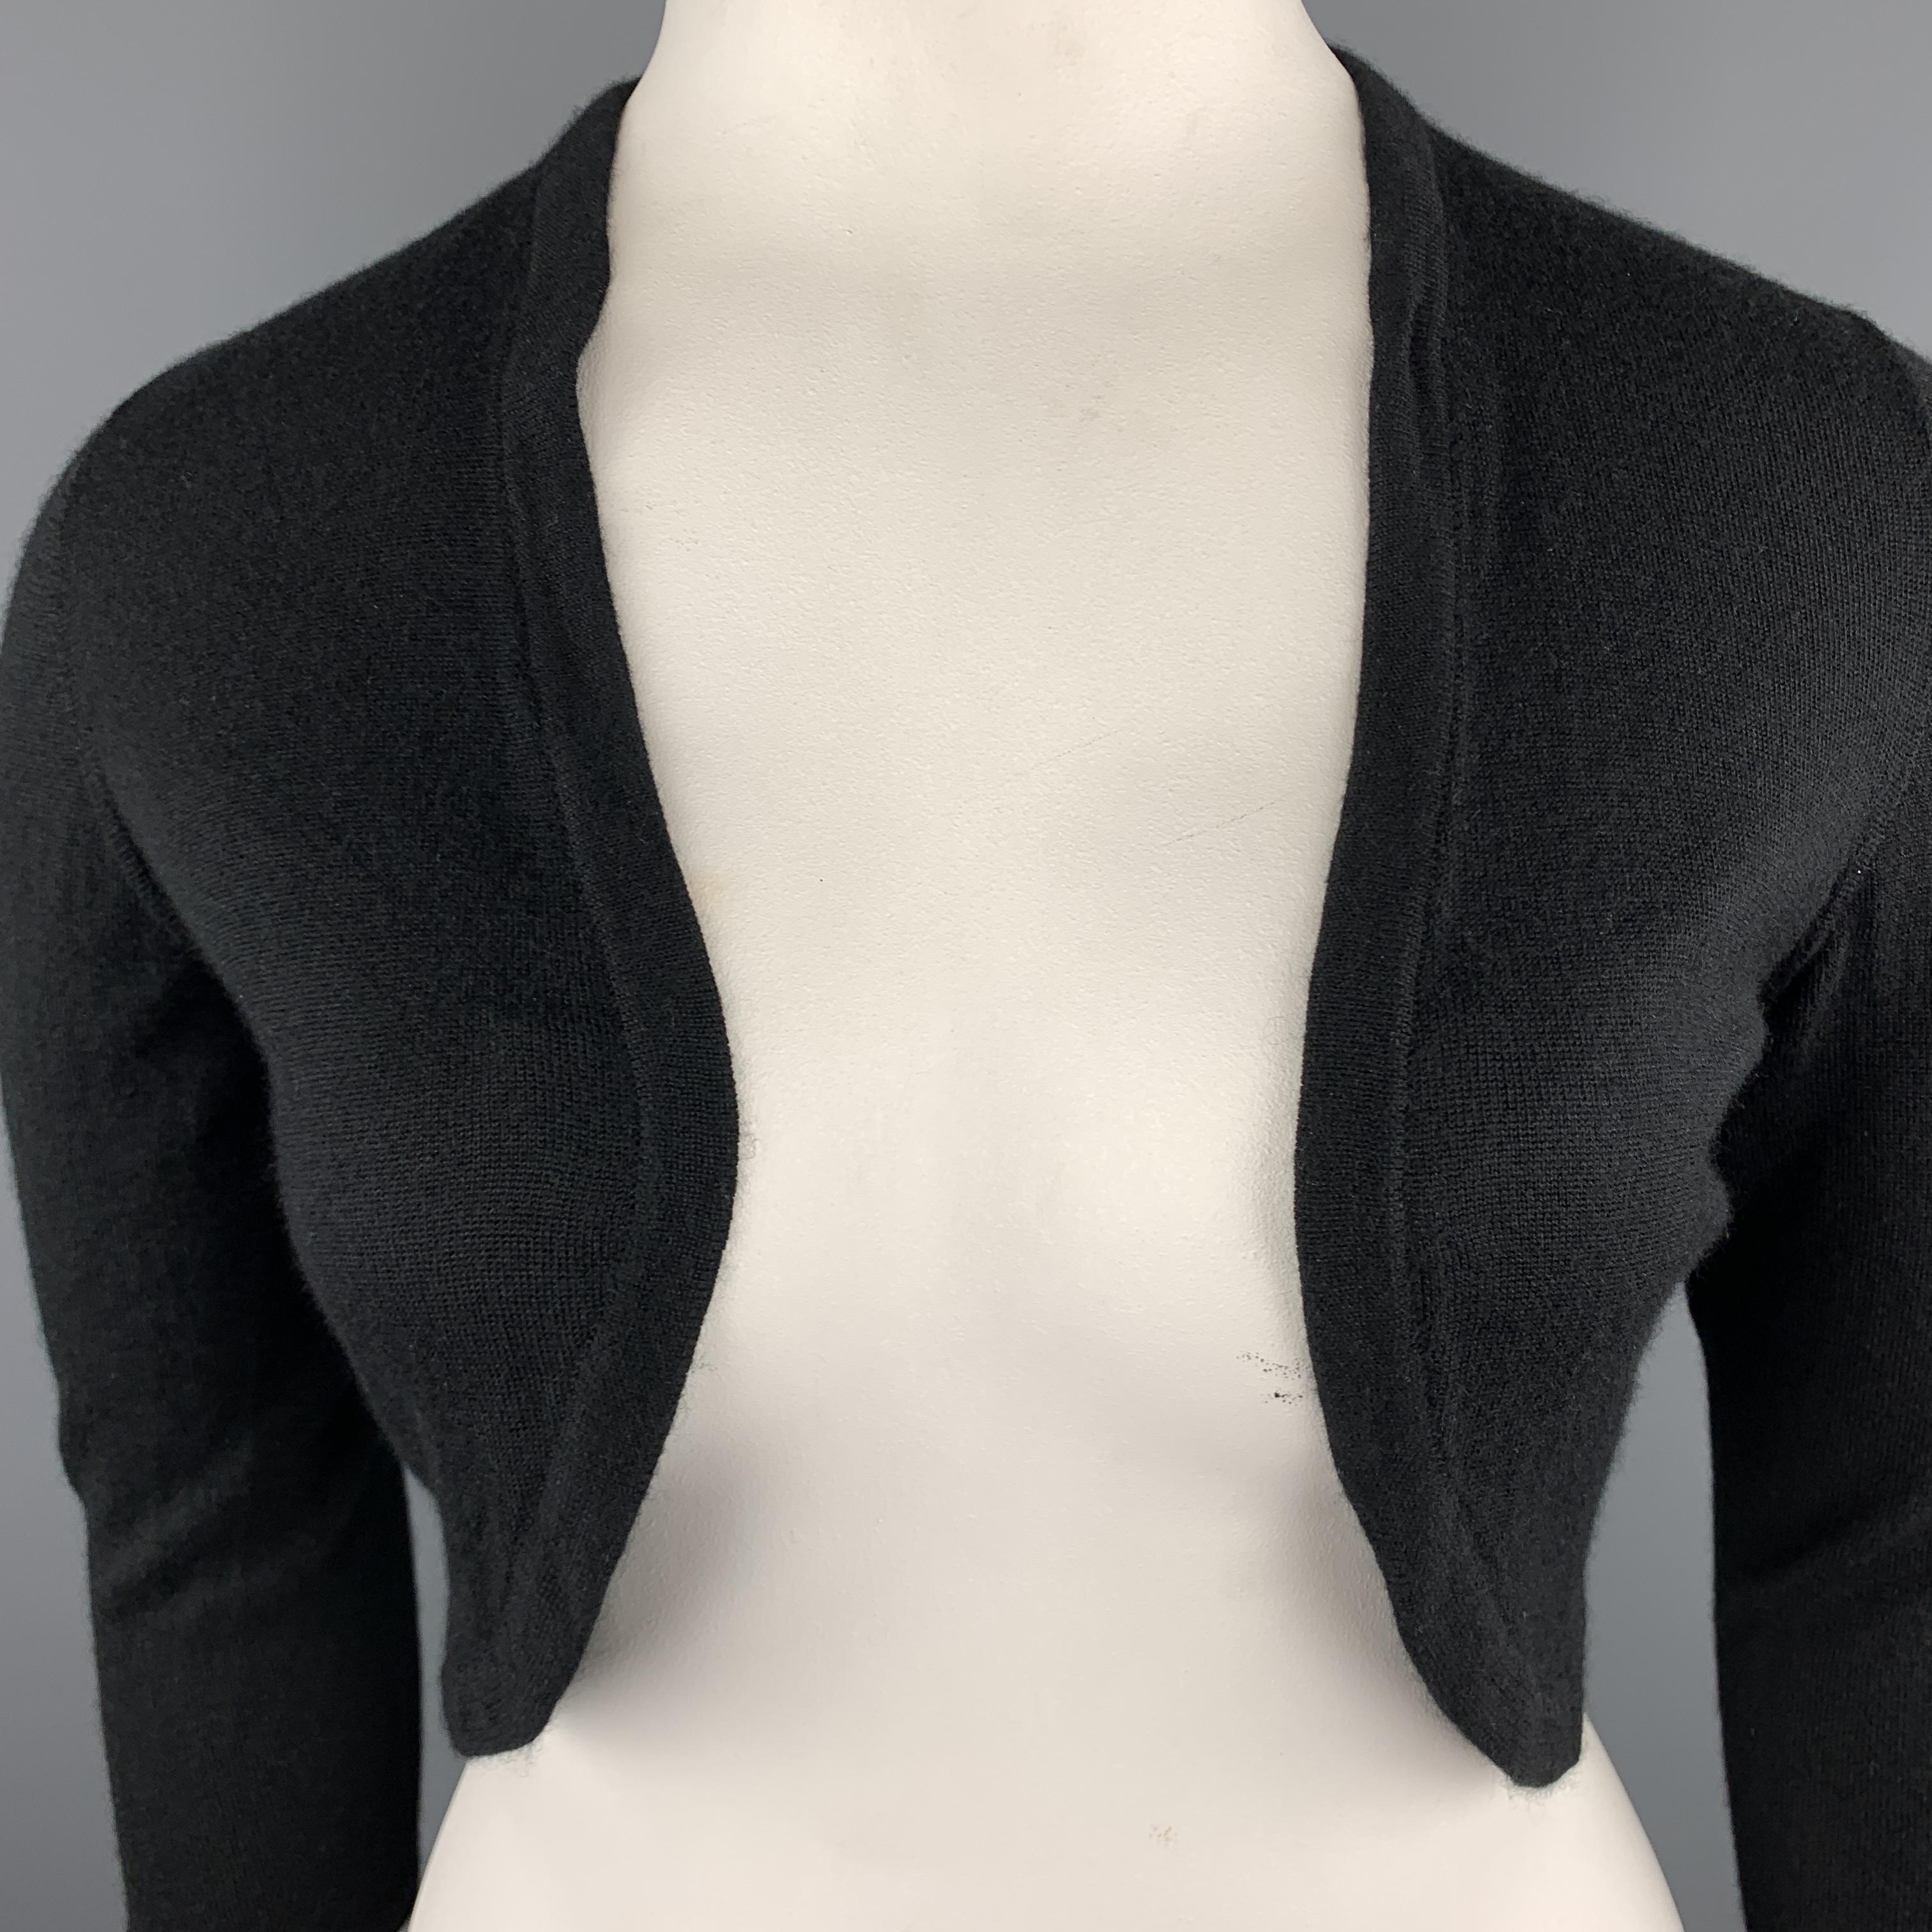 OSCAR DE LA RENTA bolero cardigan comes in fine cashmere silk blend knit with cropped sleeves and a logo embellished back. Made in USA.

Excellent Pre-Owned Condition.
Marked: L

Measurements:

Shoulder: 15 in.
Bust: 40 in.
Sleeve: 19 in.
Length: 16